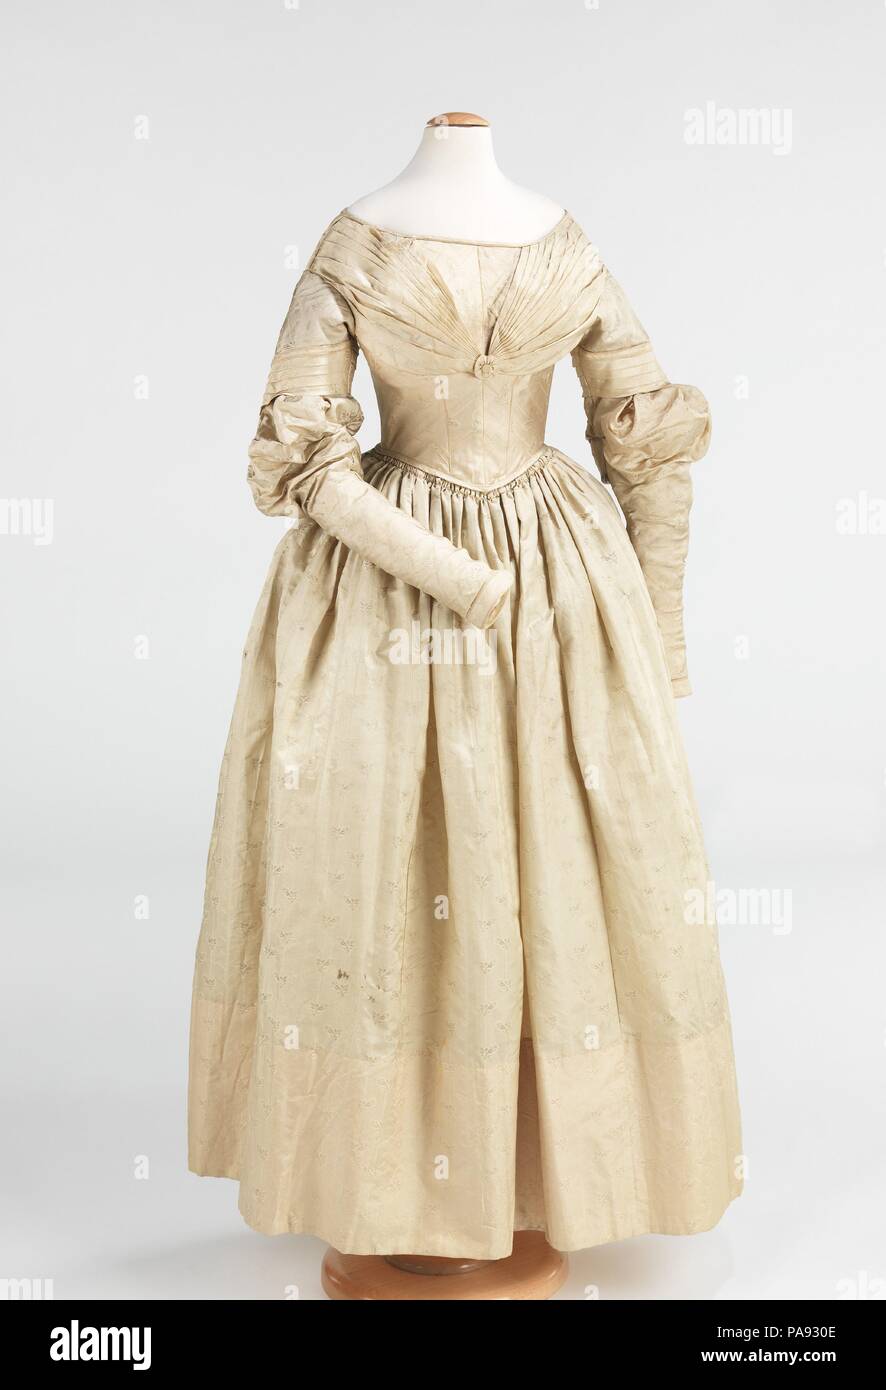 Dress. Culture: American. Date: 1837-40.  This girl's dress is a very good example of the change in style that began in 1837, the year that Queen Victoria became queen. The exaggerated gigot sleeve collapsed in that year, and the sleeve became tight on the upper arm, gradually losing its fullness over the next several years.  This dress shows that transition well and is exemplary of dresses worn by a young teenage girl of the highest style of the period. Museum: Metropolitan Museum of Art, New York, USA. Stock Photo